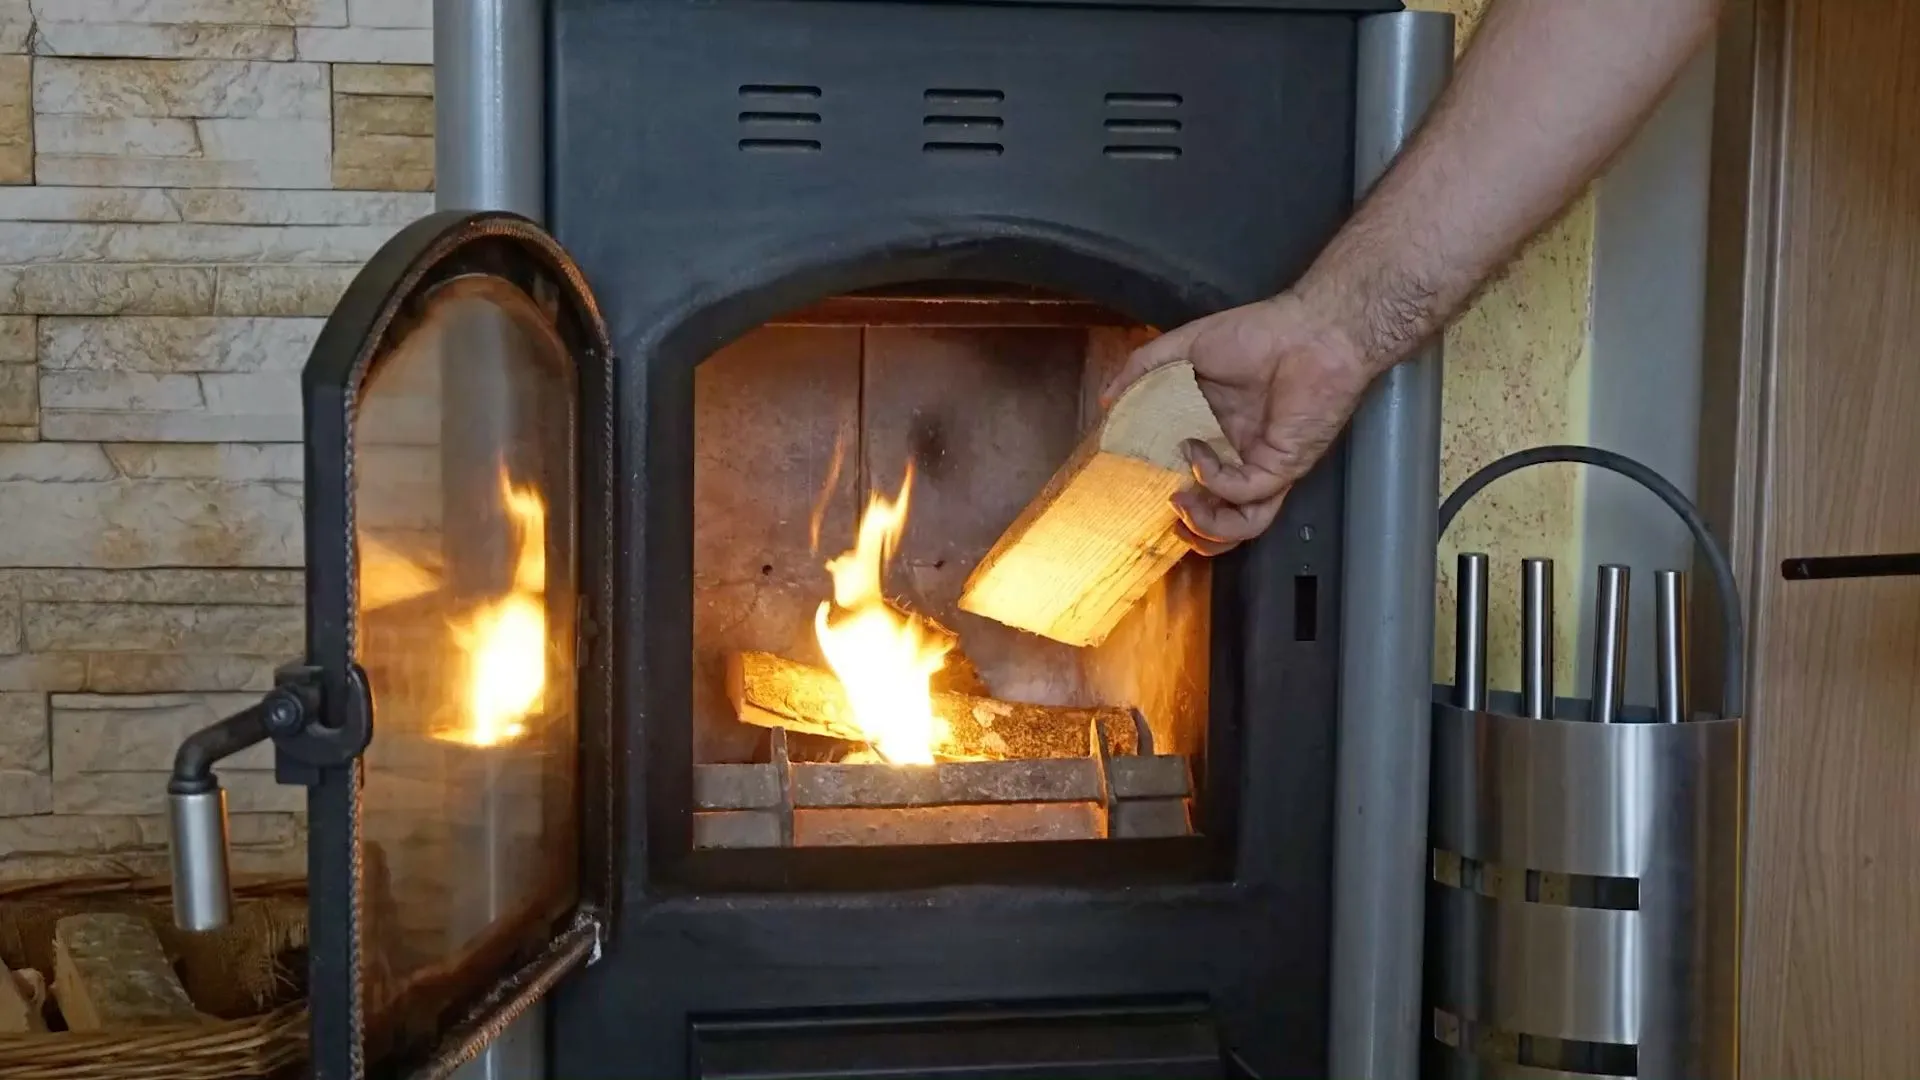 Heating with wood: 5 mistakes you should avoid with wood-burning stoves